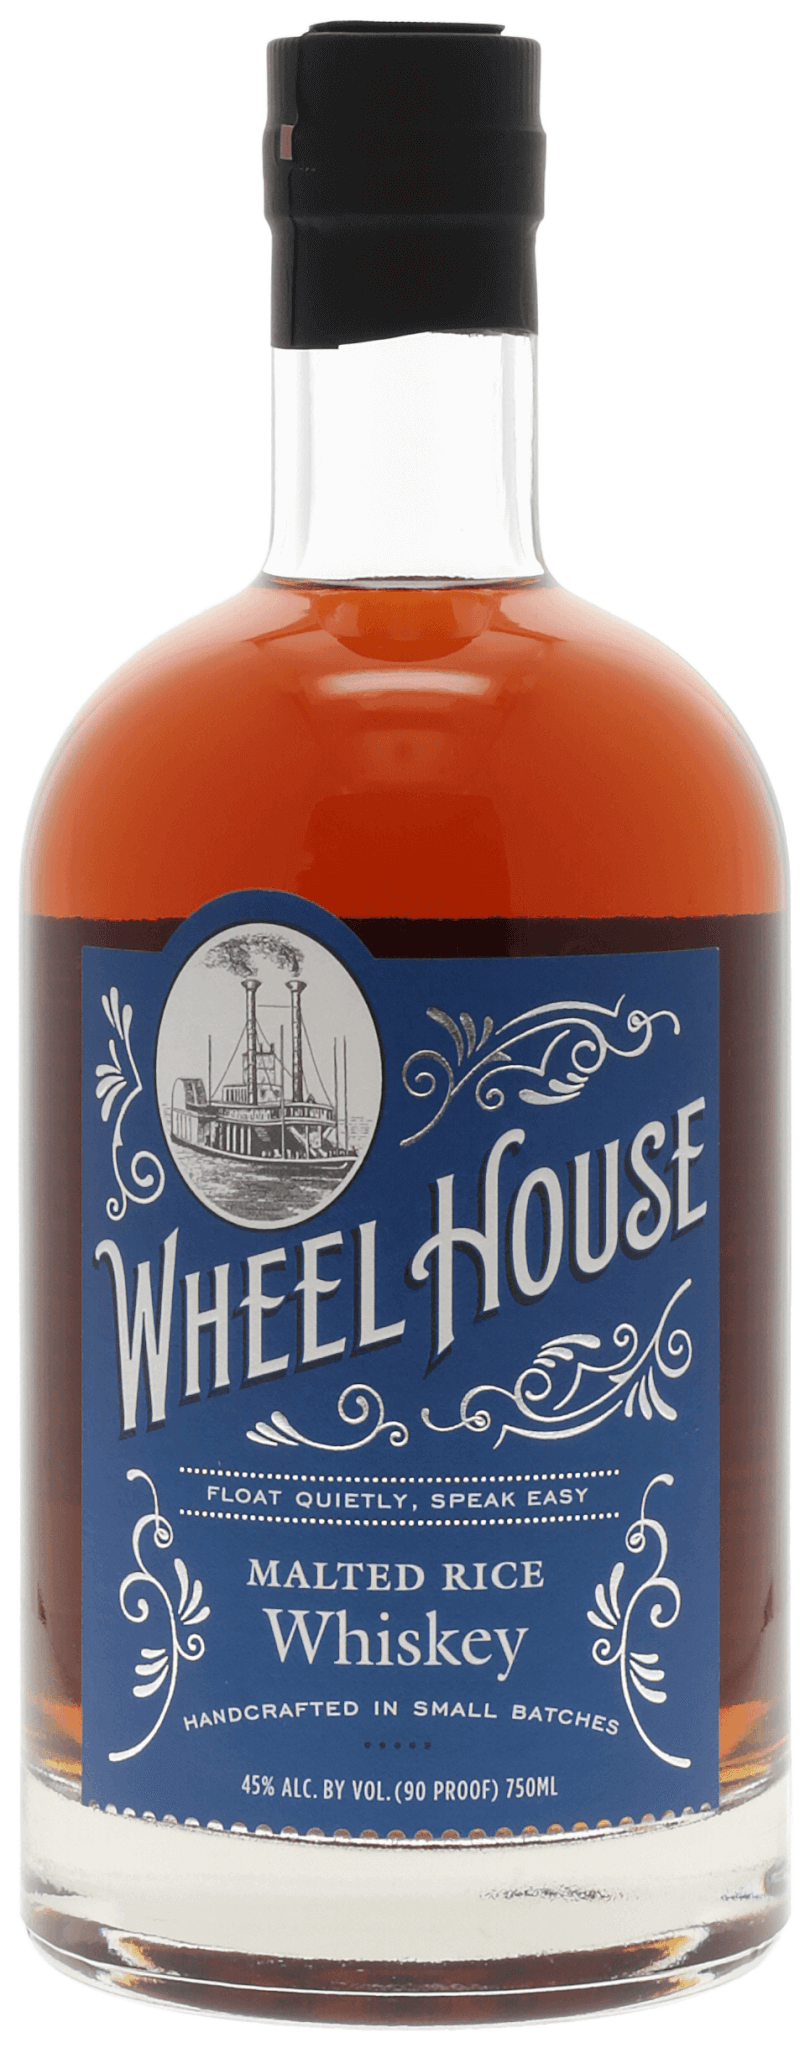 Wheel House Malted Rice Whiskey